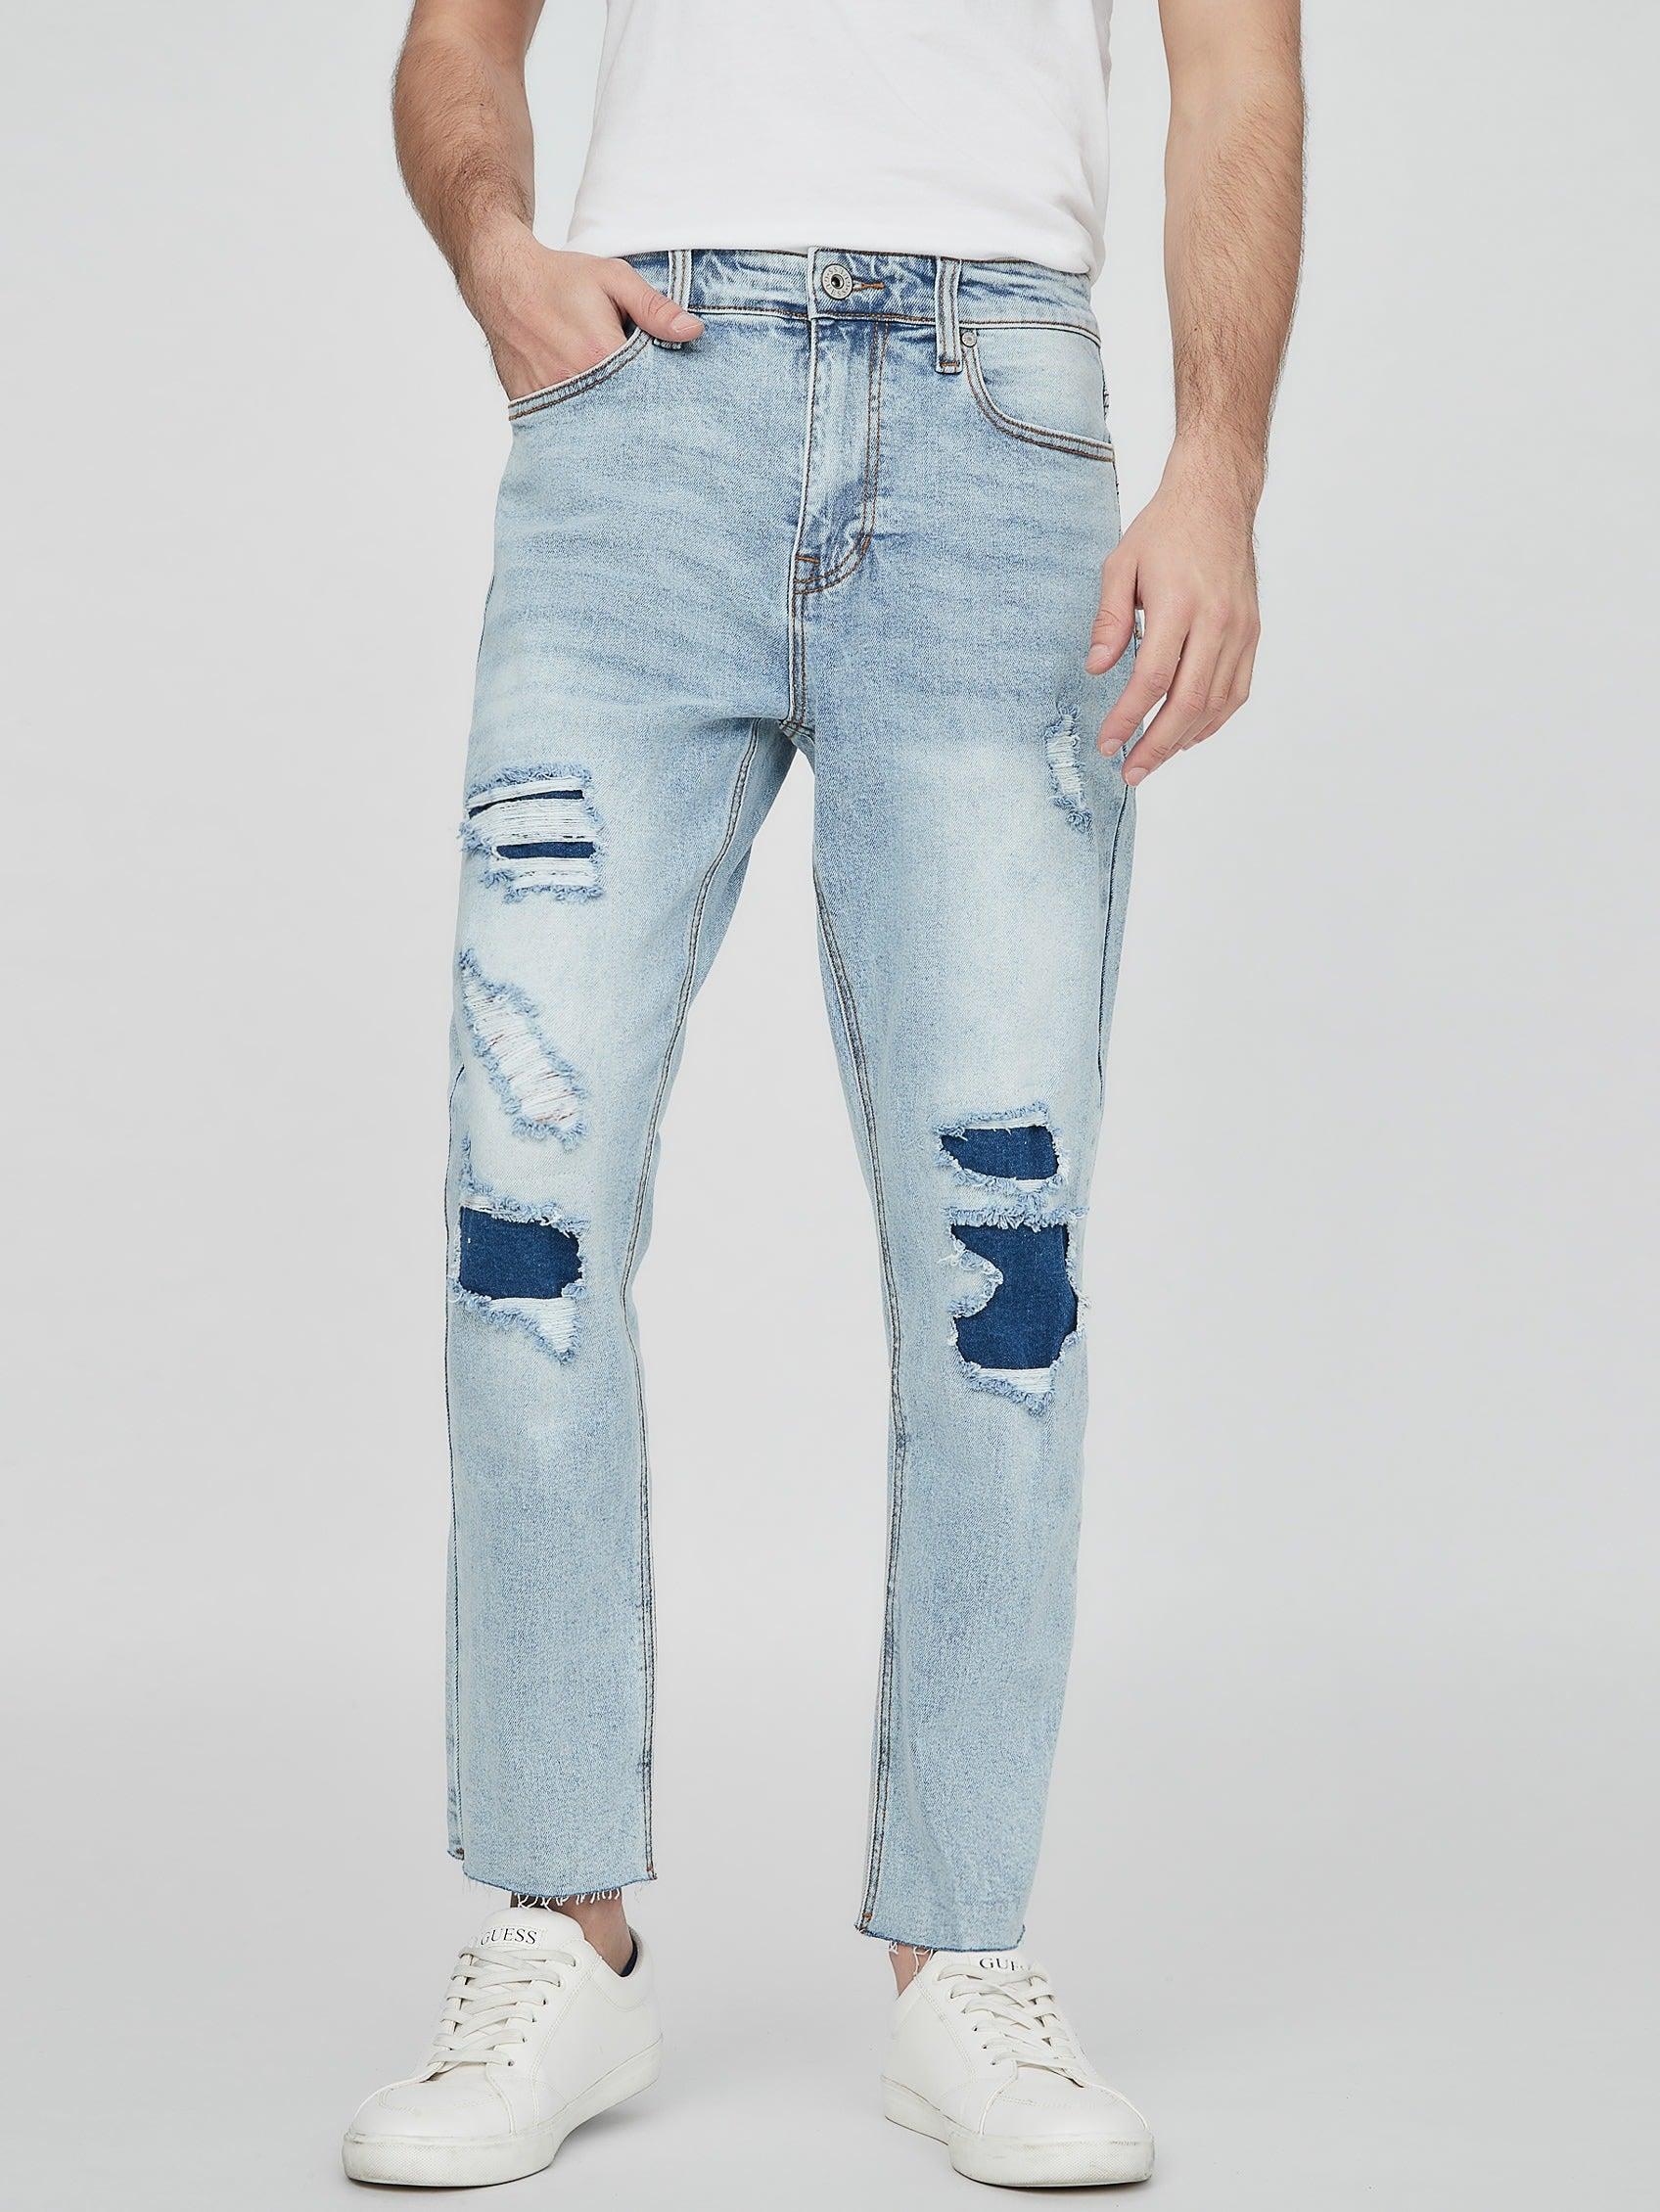 Guess Factory Florence Distressed Cropped Jeans in Blue for Men